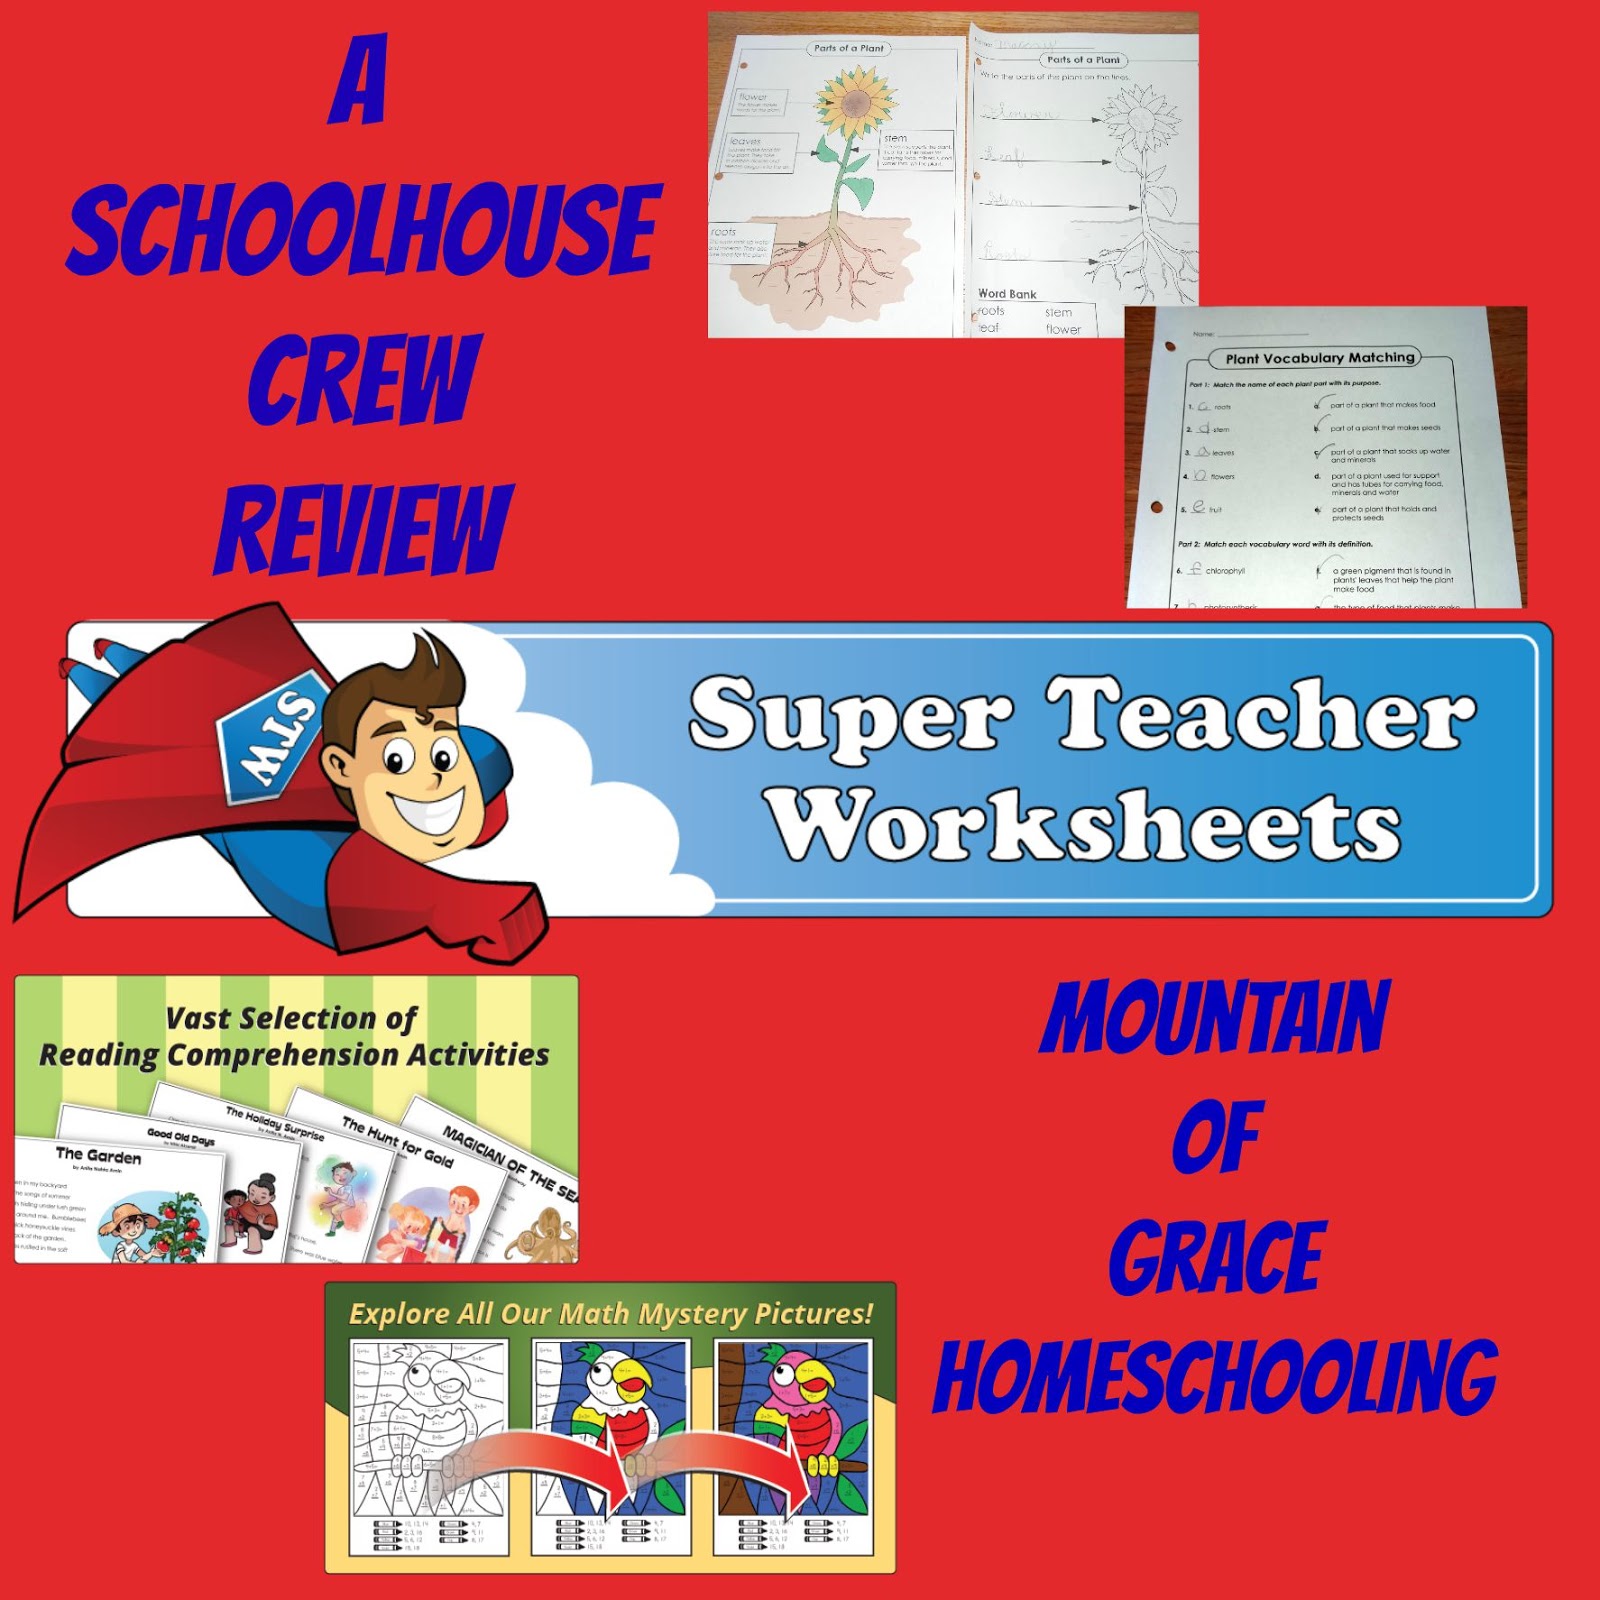 Mountain Of Grace Homeschooling TOS Review For Super Teacher Worksheets